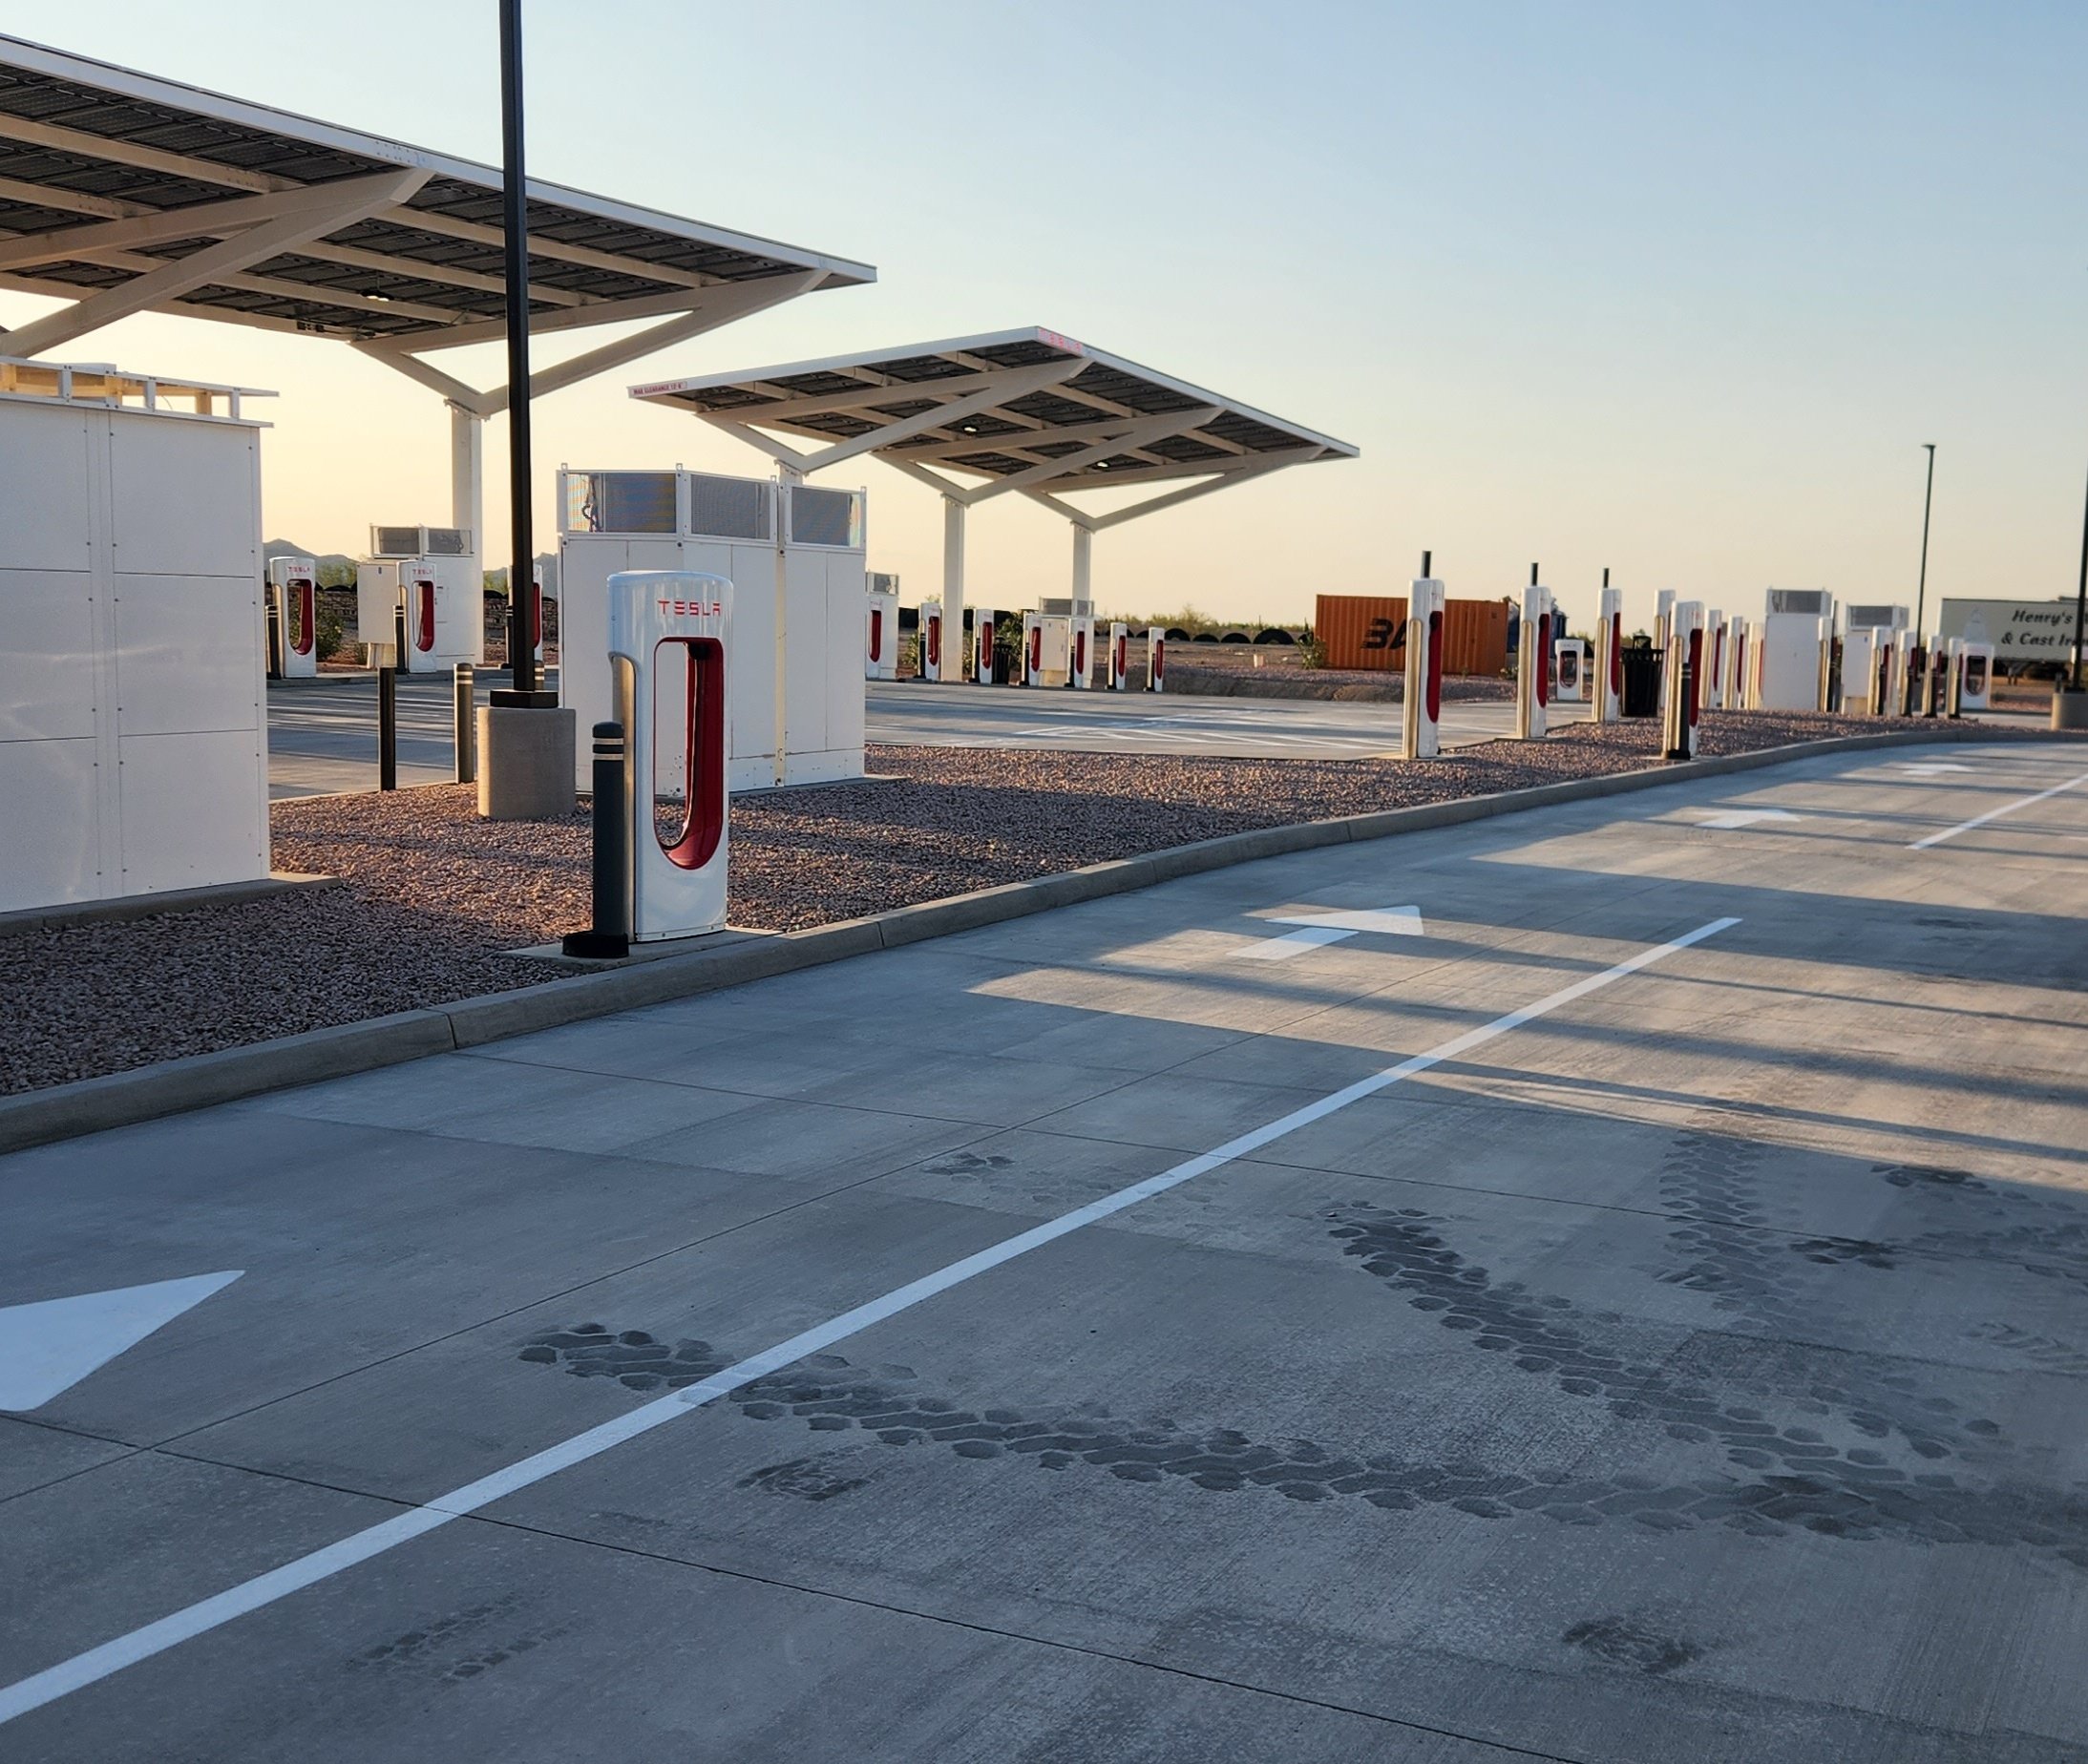 New Tesla Supercharger includes pull-through charging stalls